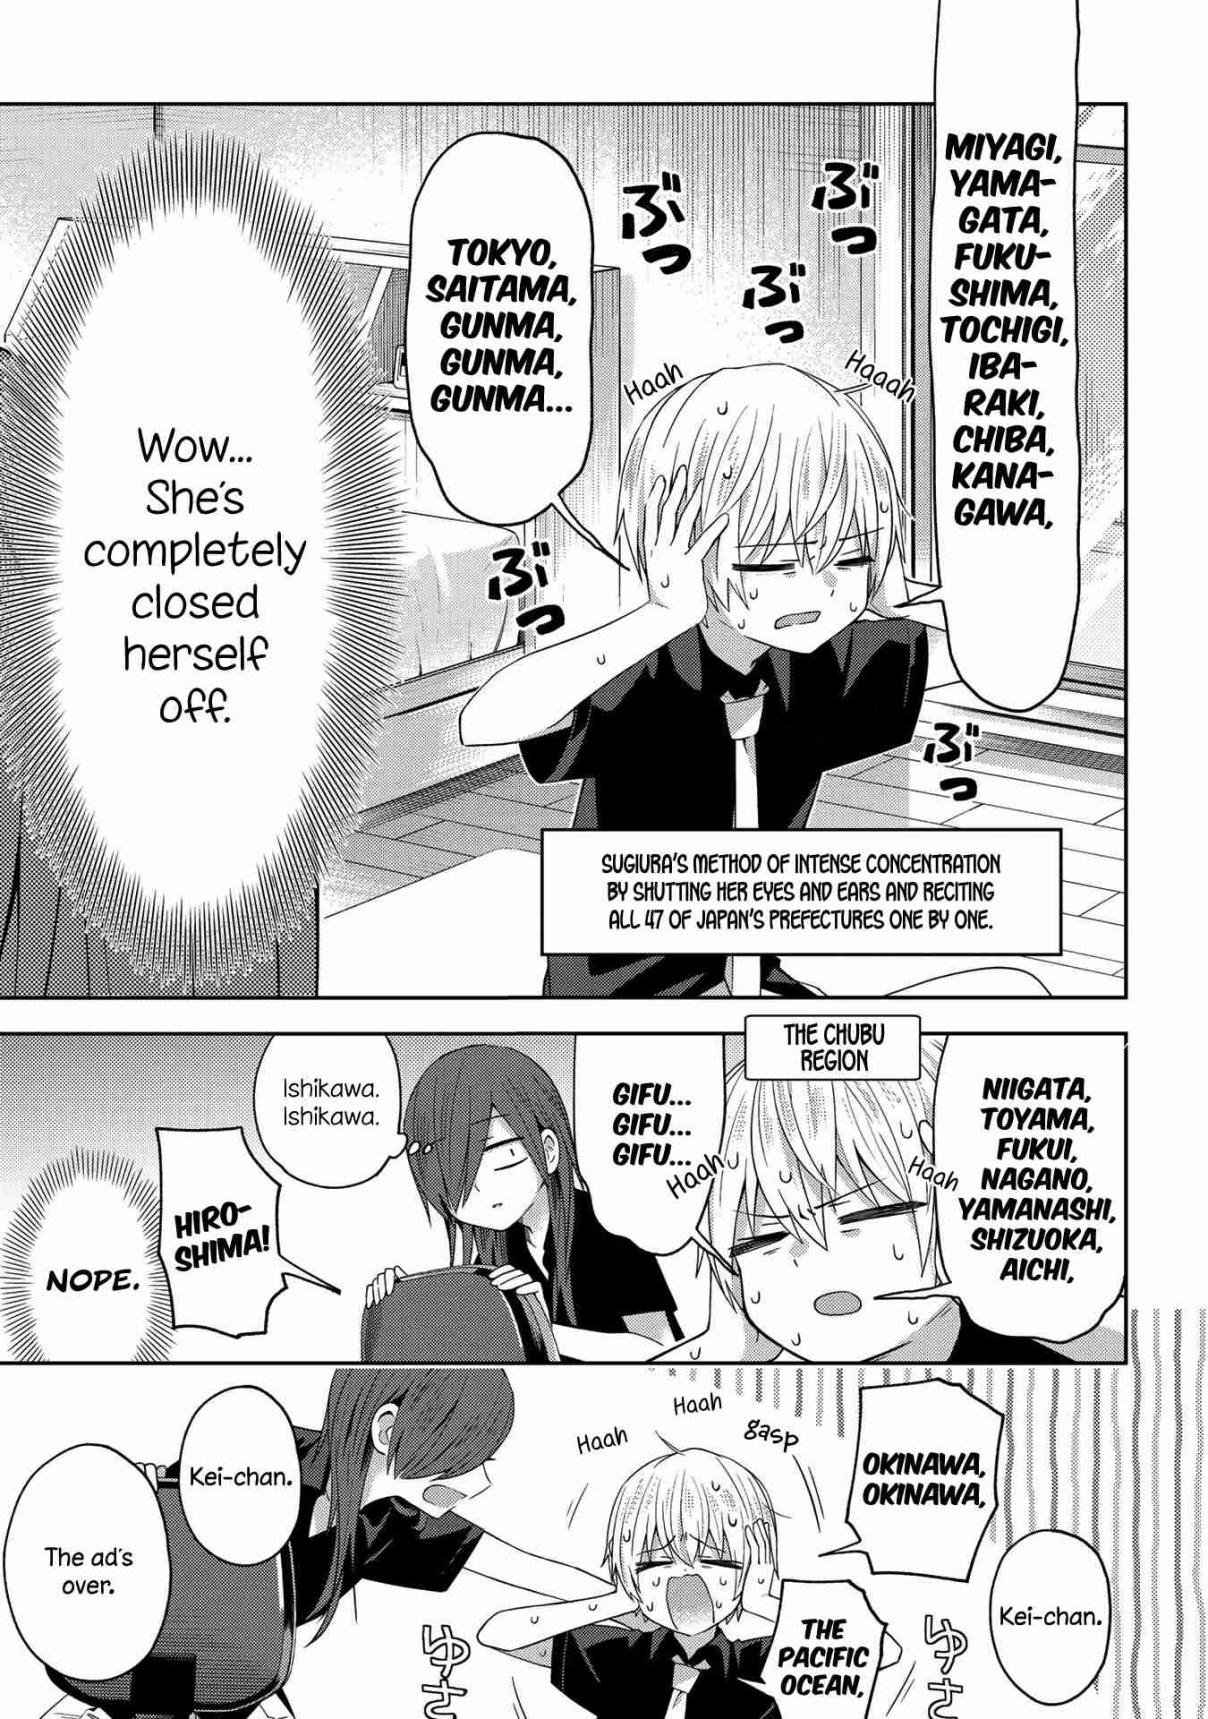 School Zone Vol. 2 Ch. 34 That looks really bad...